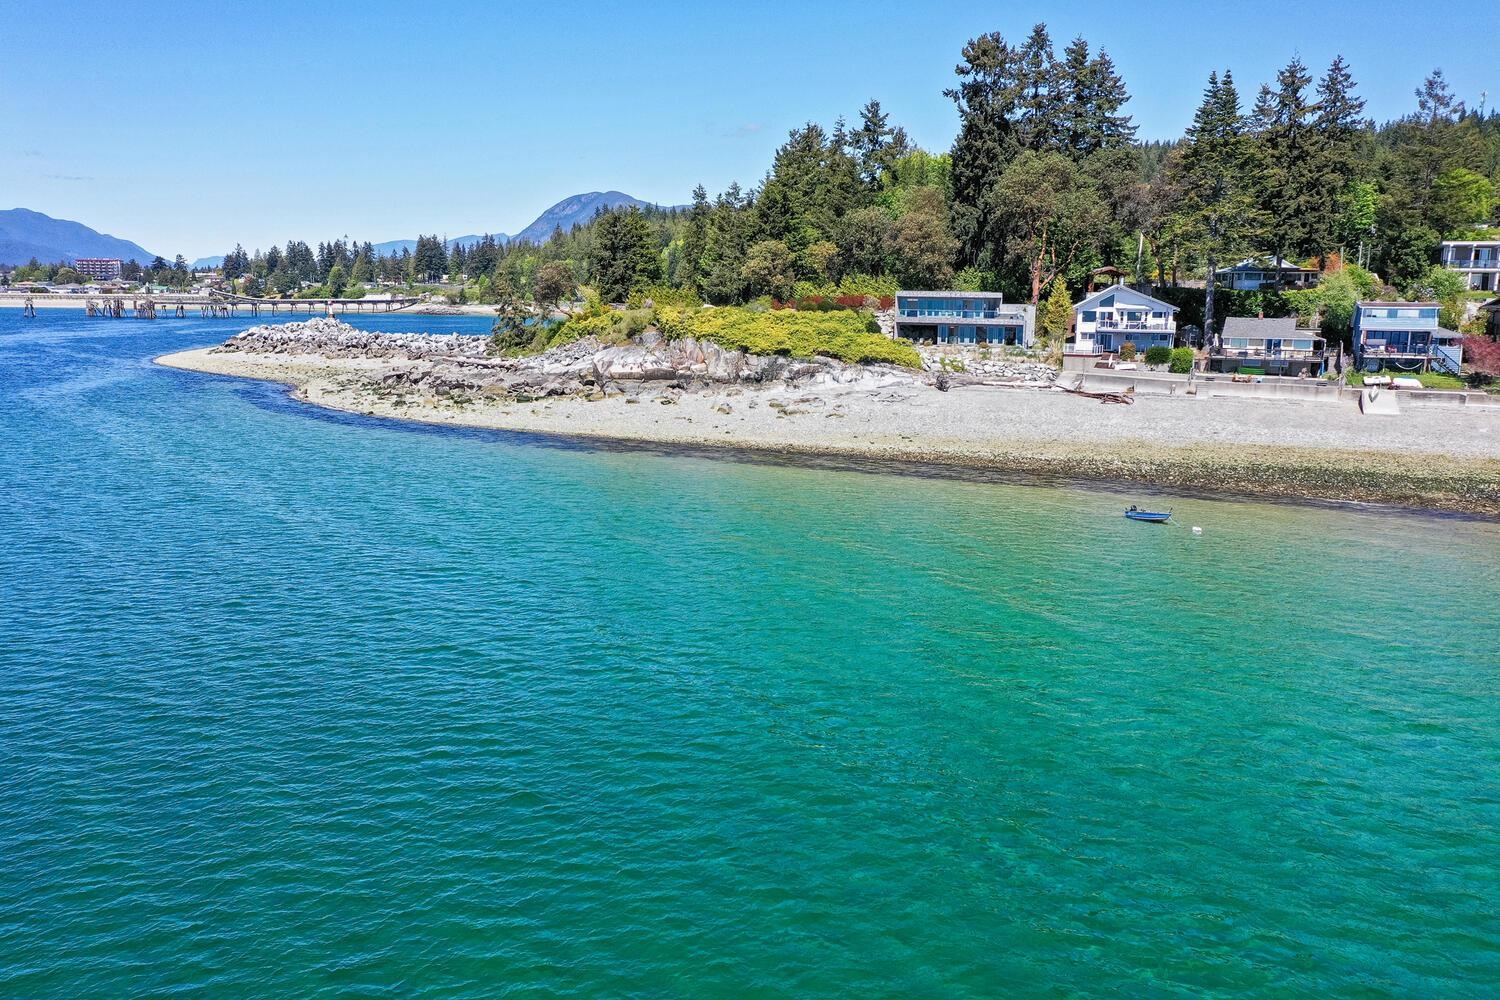 Sechelt District House/Single Family for sale:  2 bedroom 1,316 sq.ft. (Listed 3600-05-18)